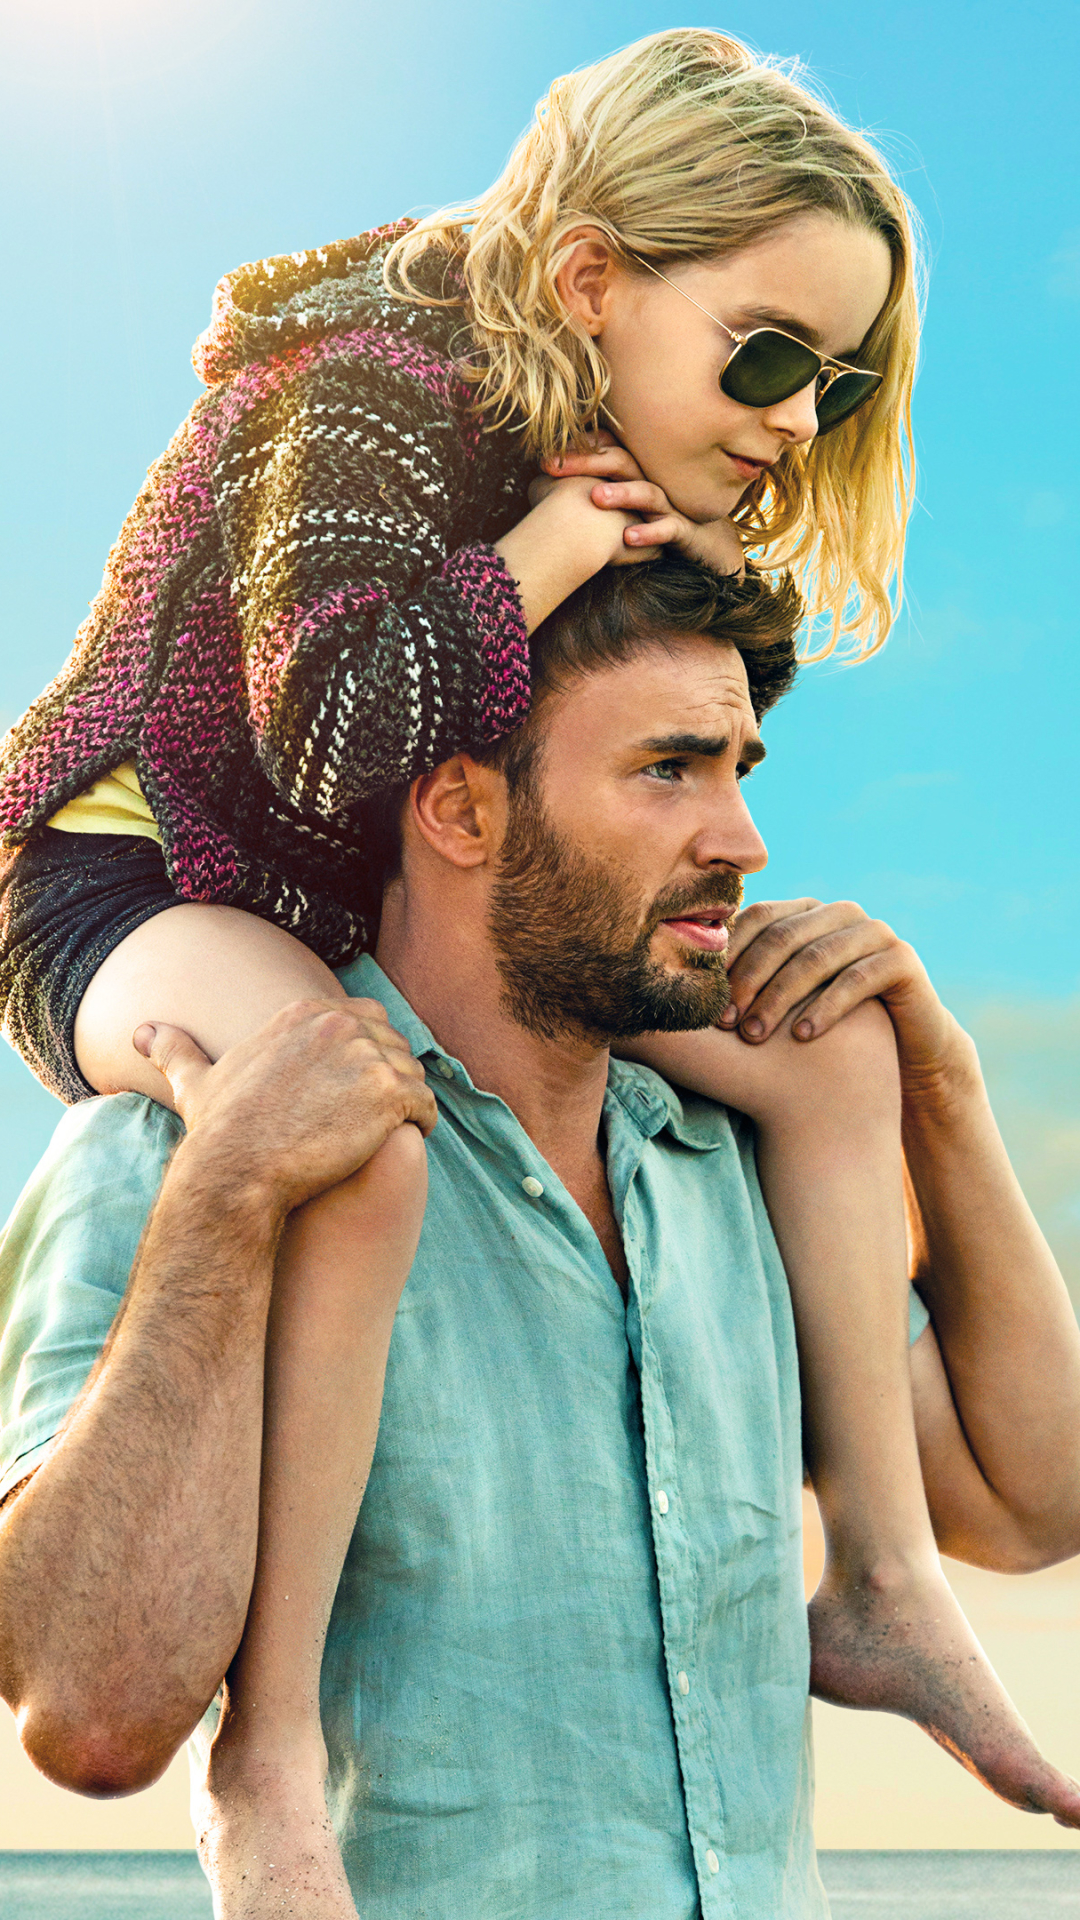 An Exclusive Interview With Chris Evans #GiftedMovie |